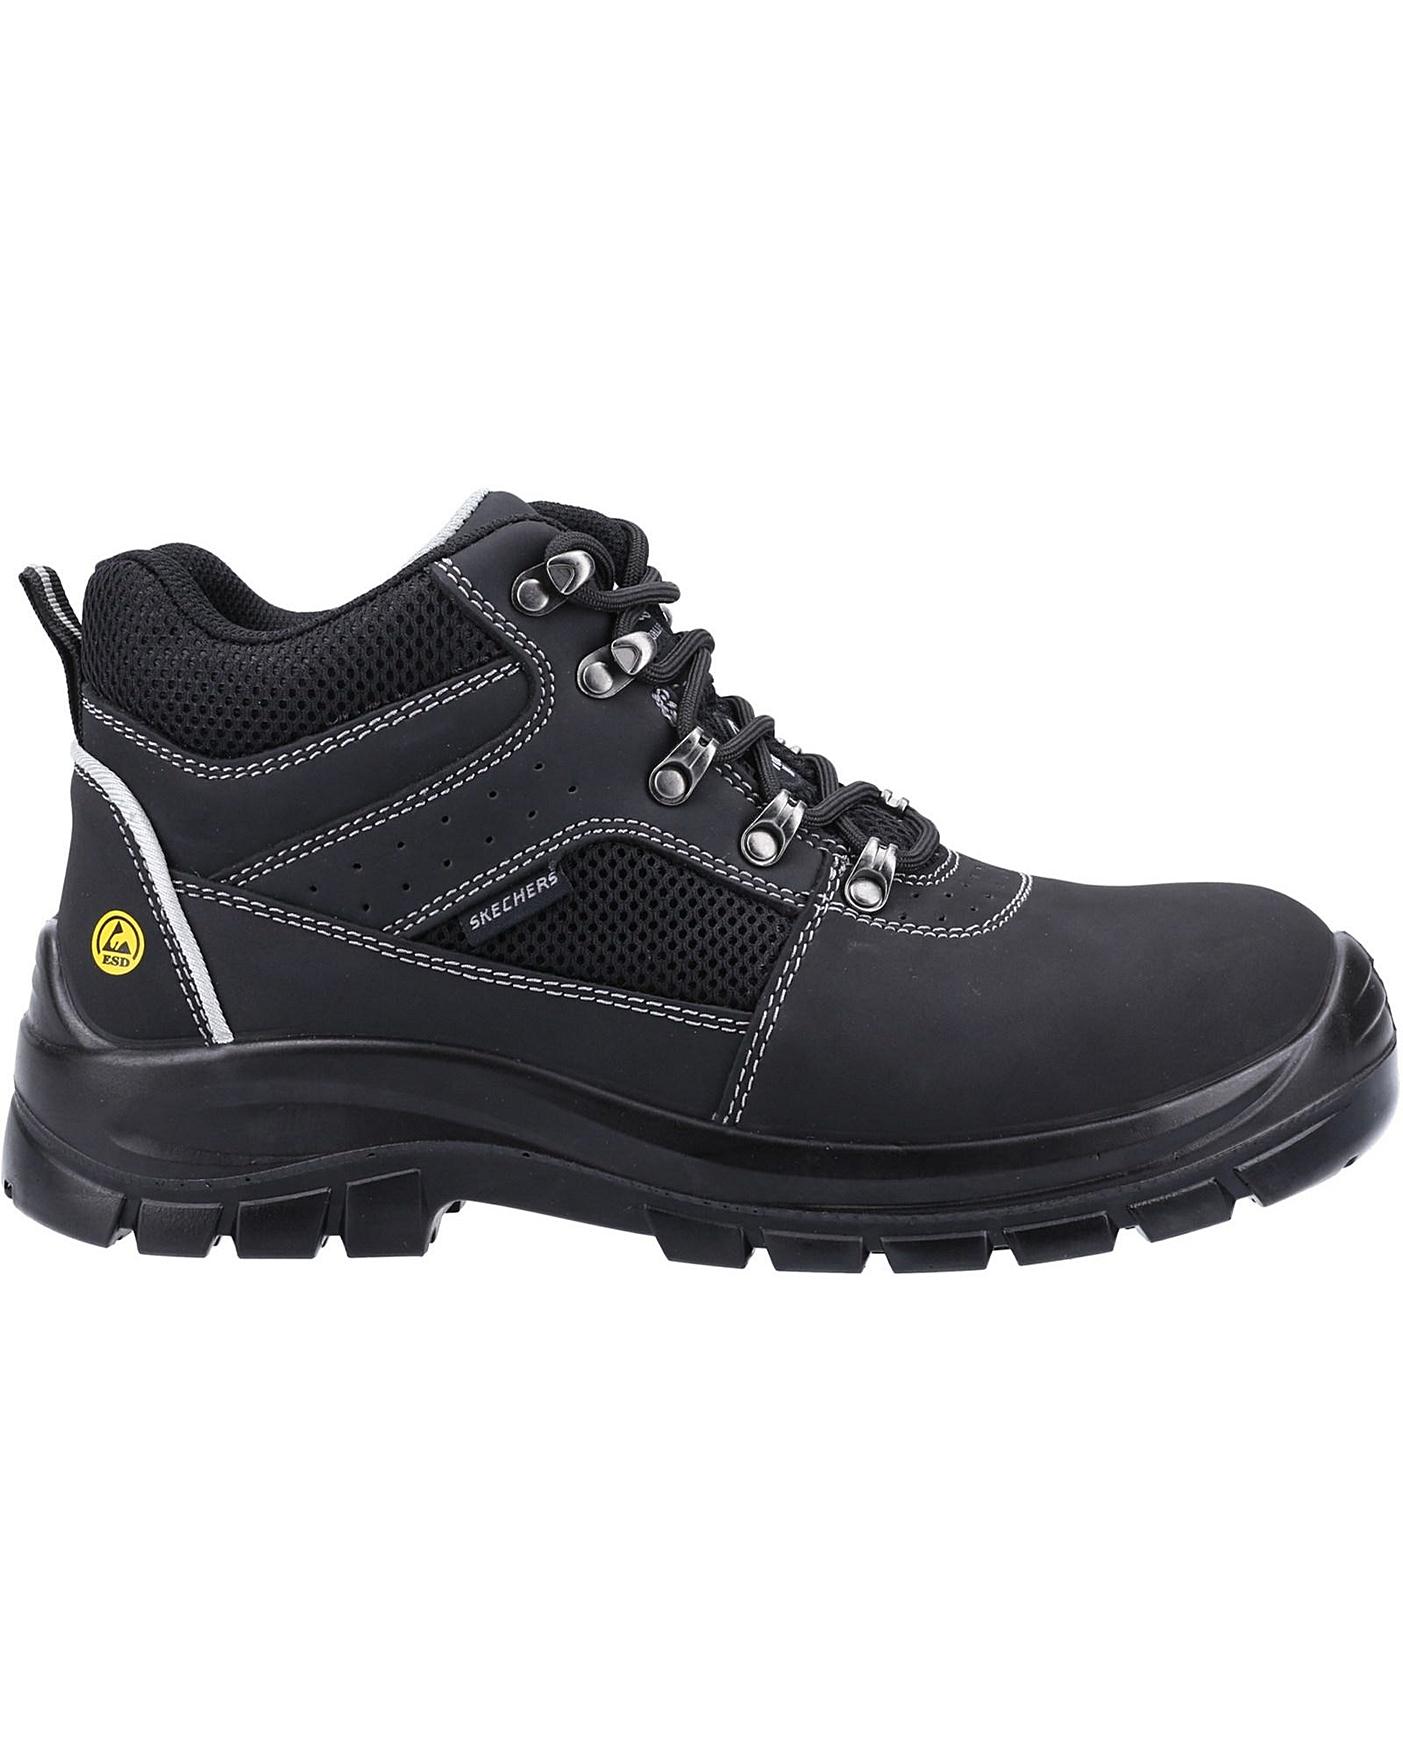 Trophus Letic Safety Boot